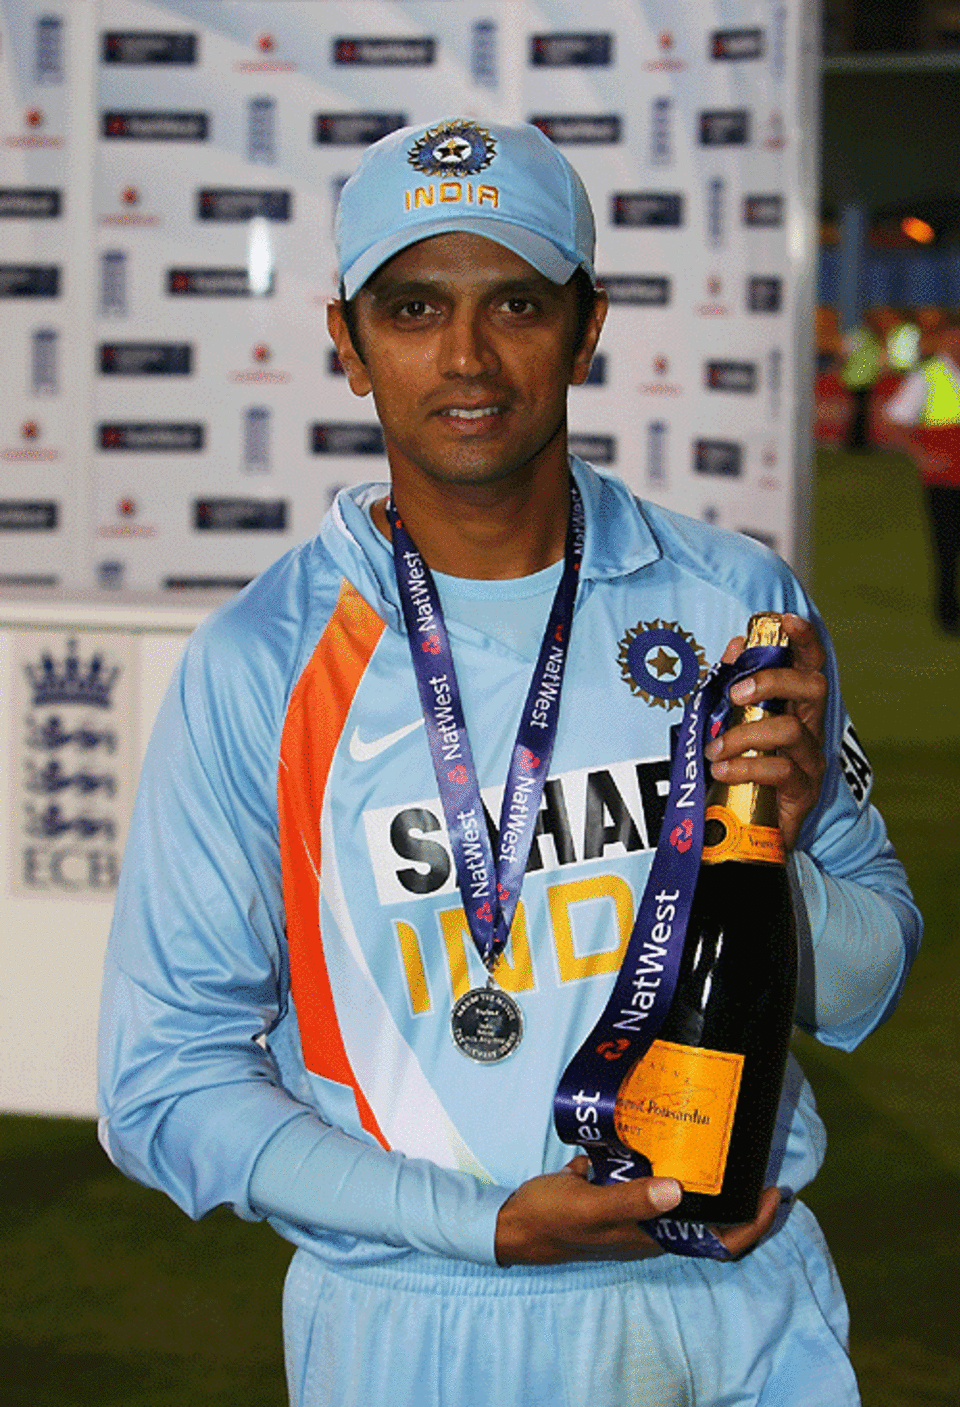 Rahul Dravid was named Man of the Match for his 63-ball 92